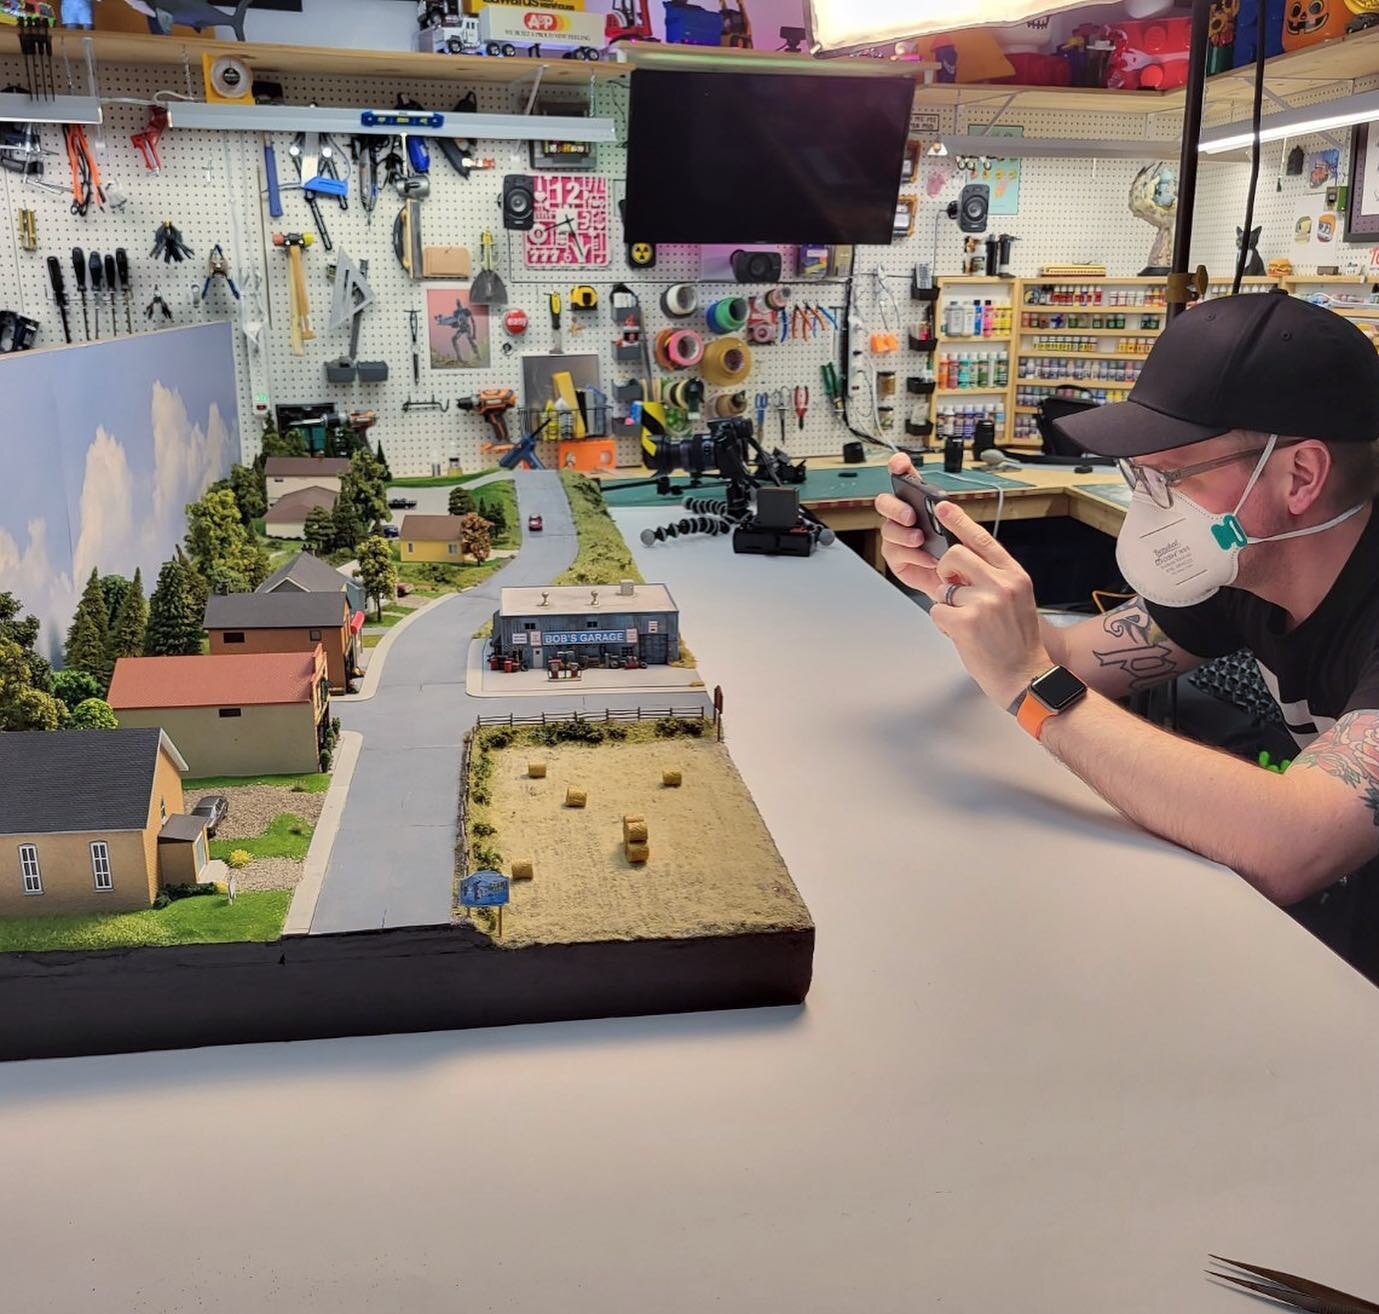 Here&rsquo;s the finished Schitt&rsquo;s Creek diorama, we added all of the finishing touches on the weekend and then had a photoshoot. All buildings are designed and built by @487models, building painting by @aliyahcreates and scenery, details and i